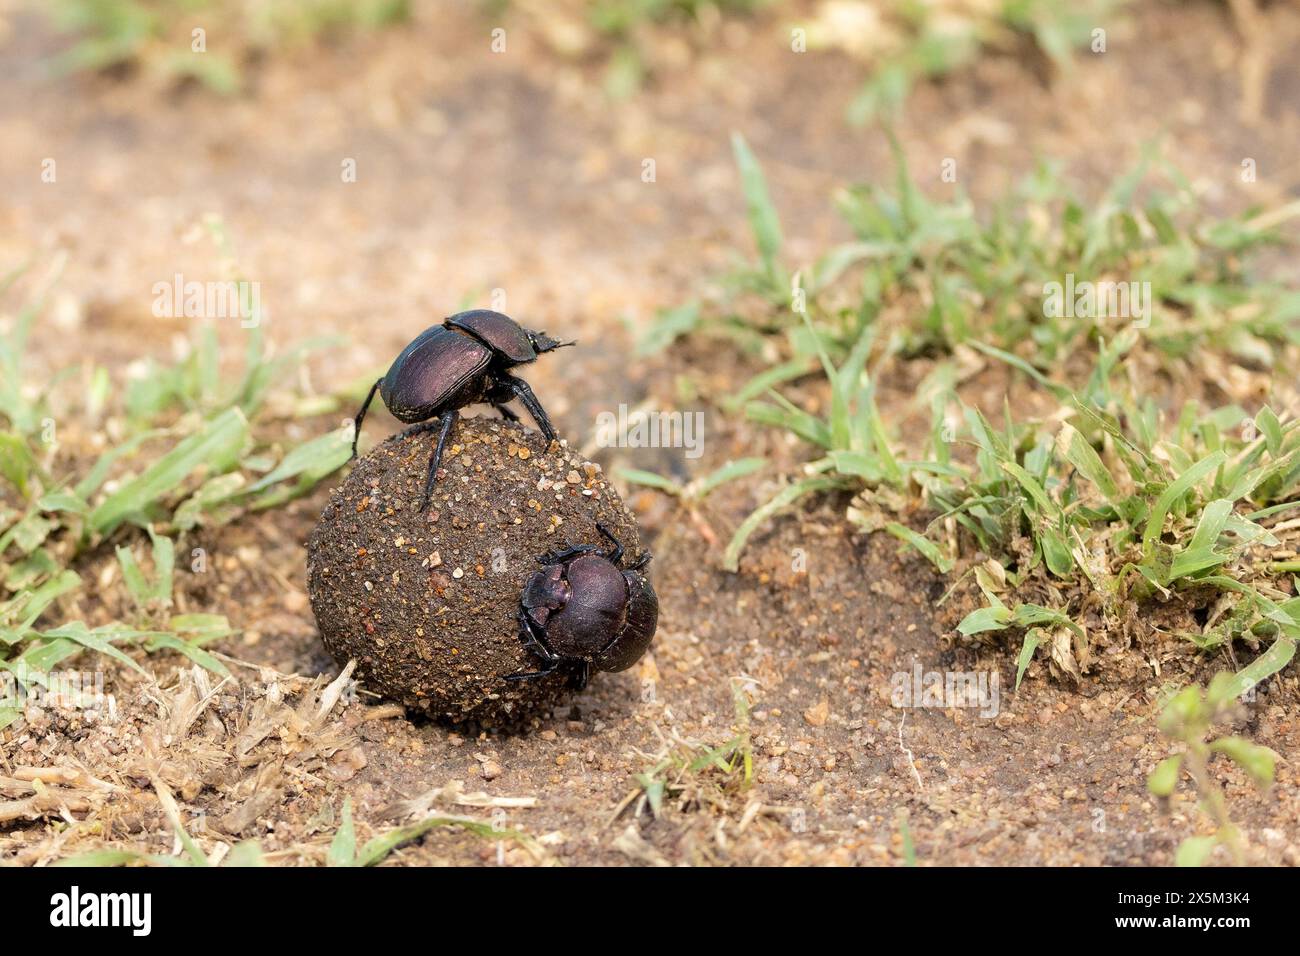 Dung beetles, Coleoptera, on a ball of dung. Stock Photo